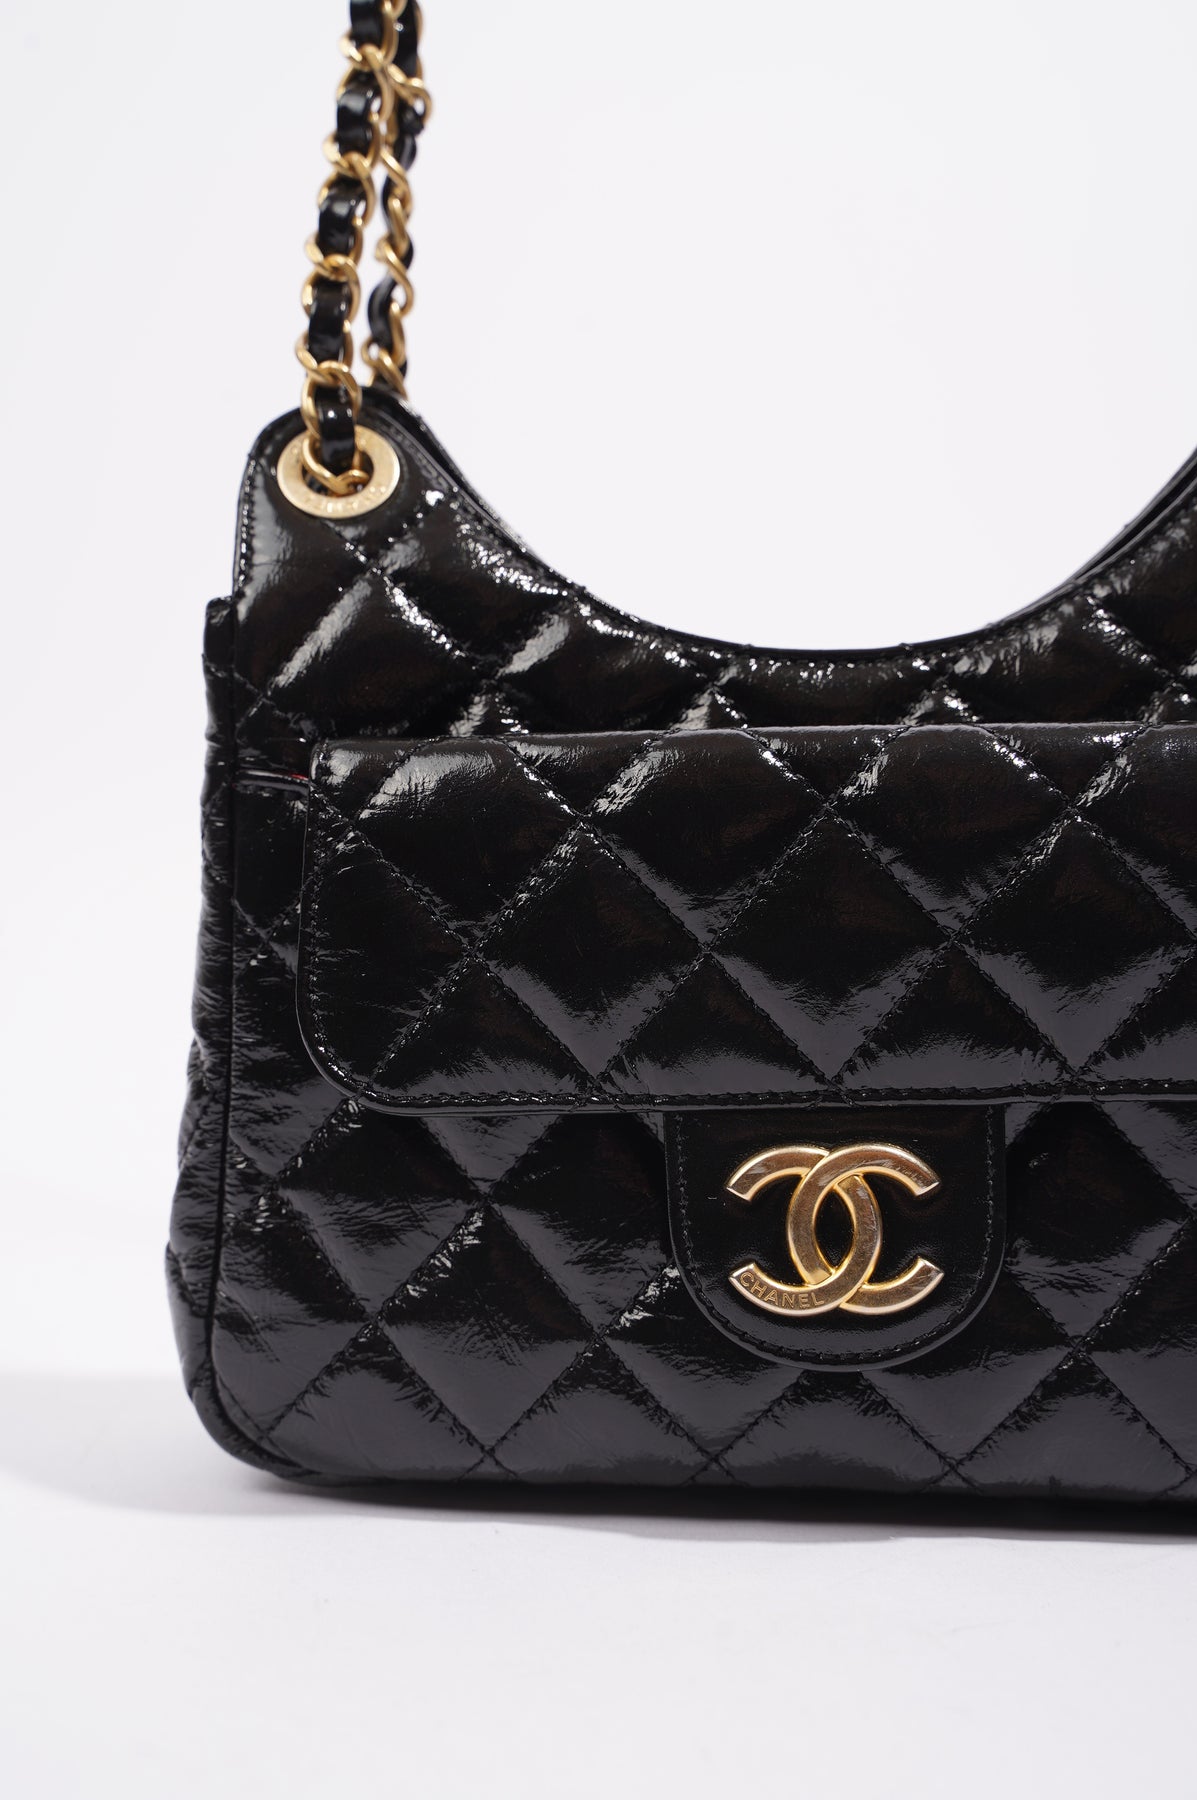 Chanel Black Small Patent Leather Double Sided Bag